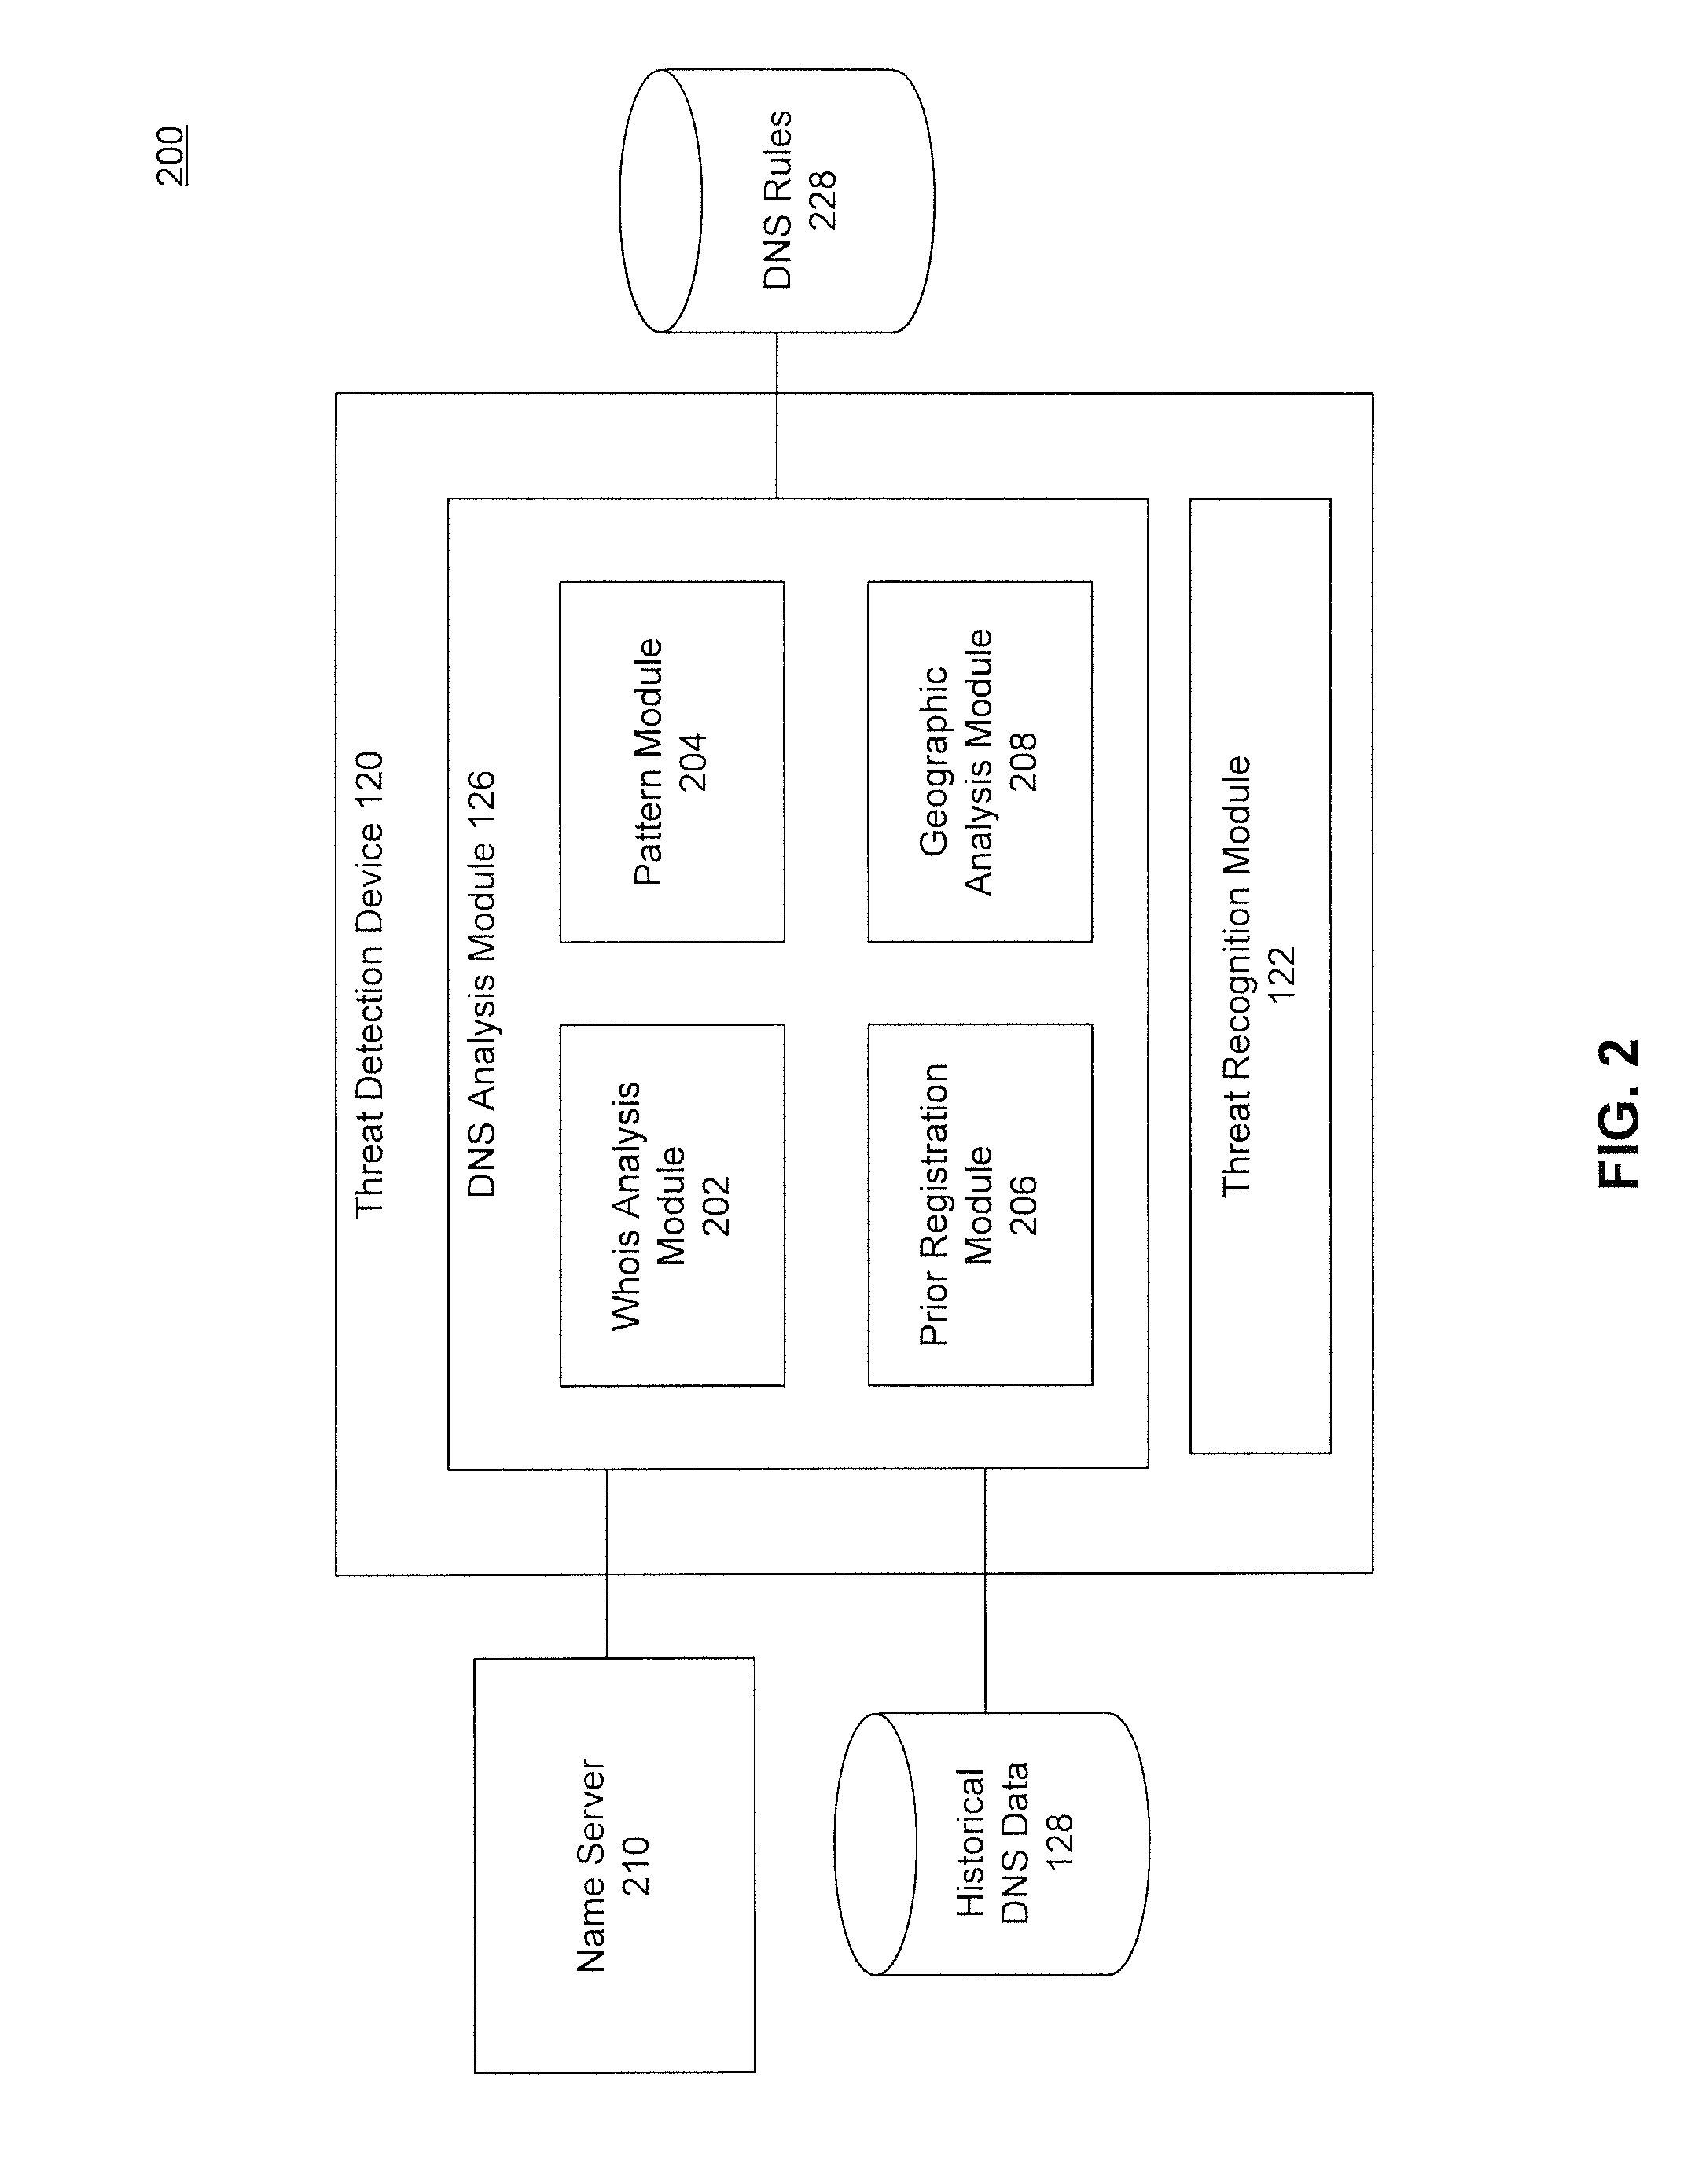 Network Threat Detection and Mitigation Using a Domain Name Service and Network Transaction Data